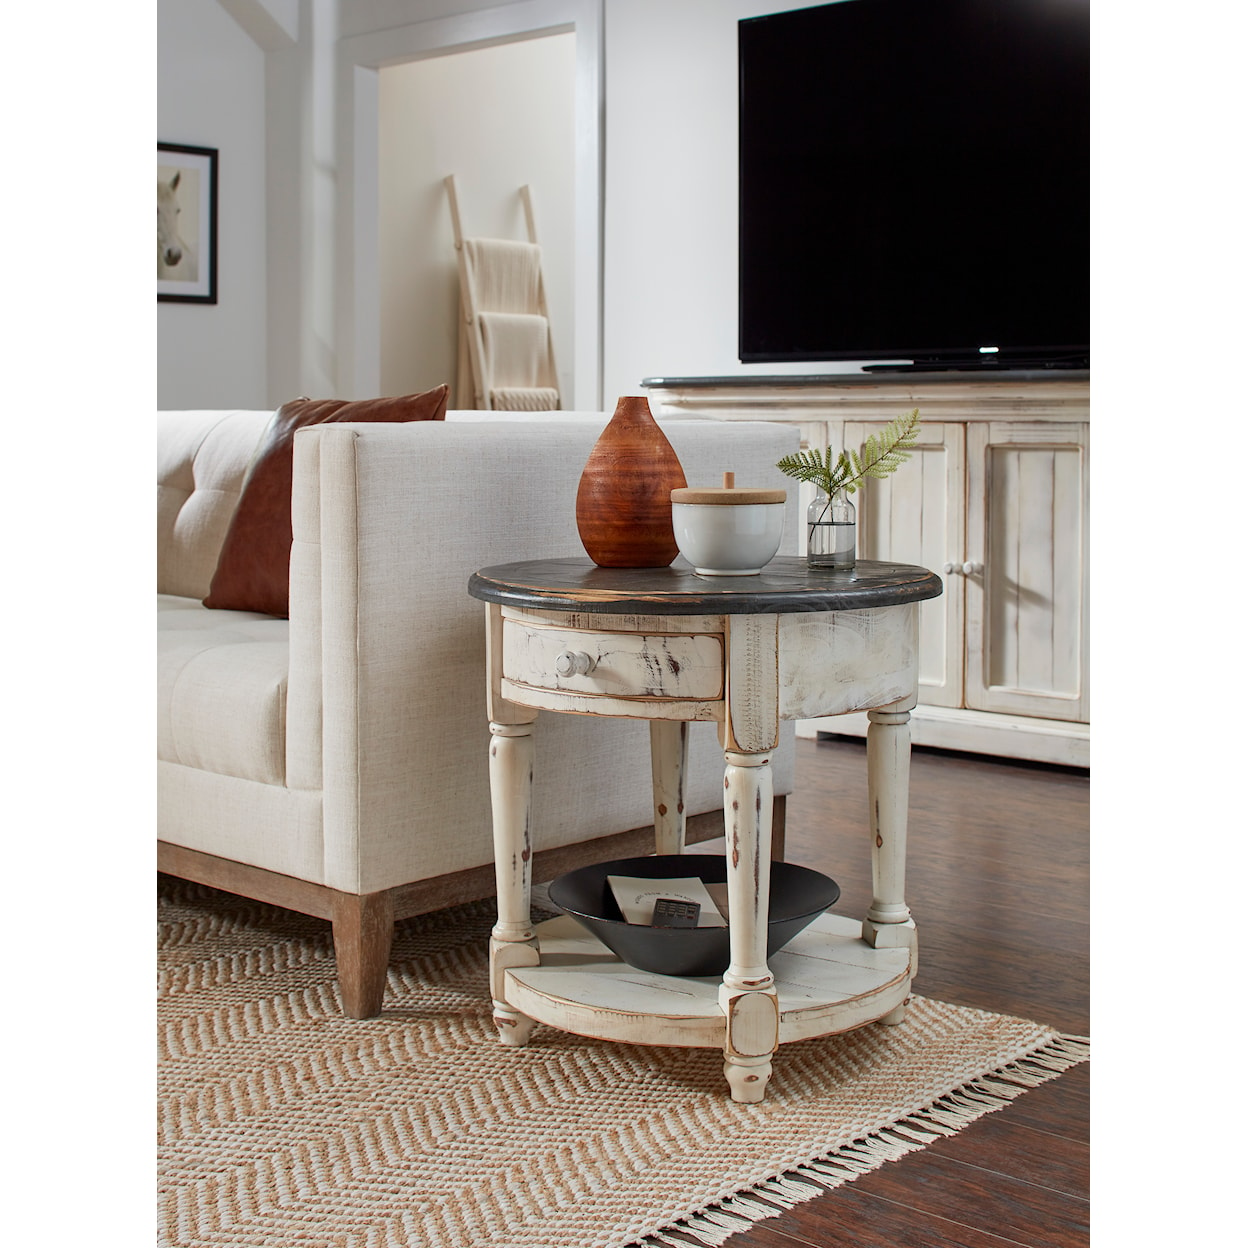 Aspenhome Hinsdale Round End Table